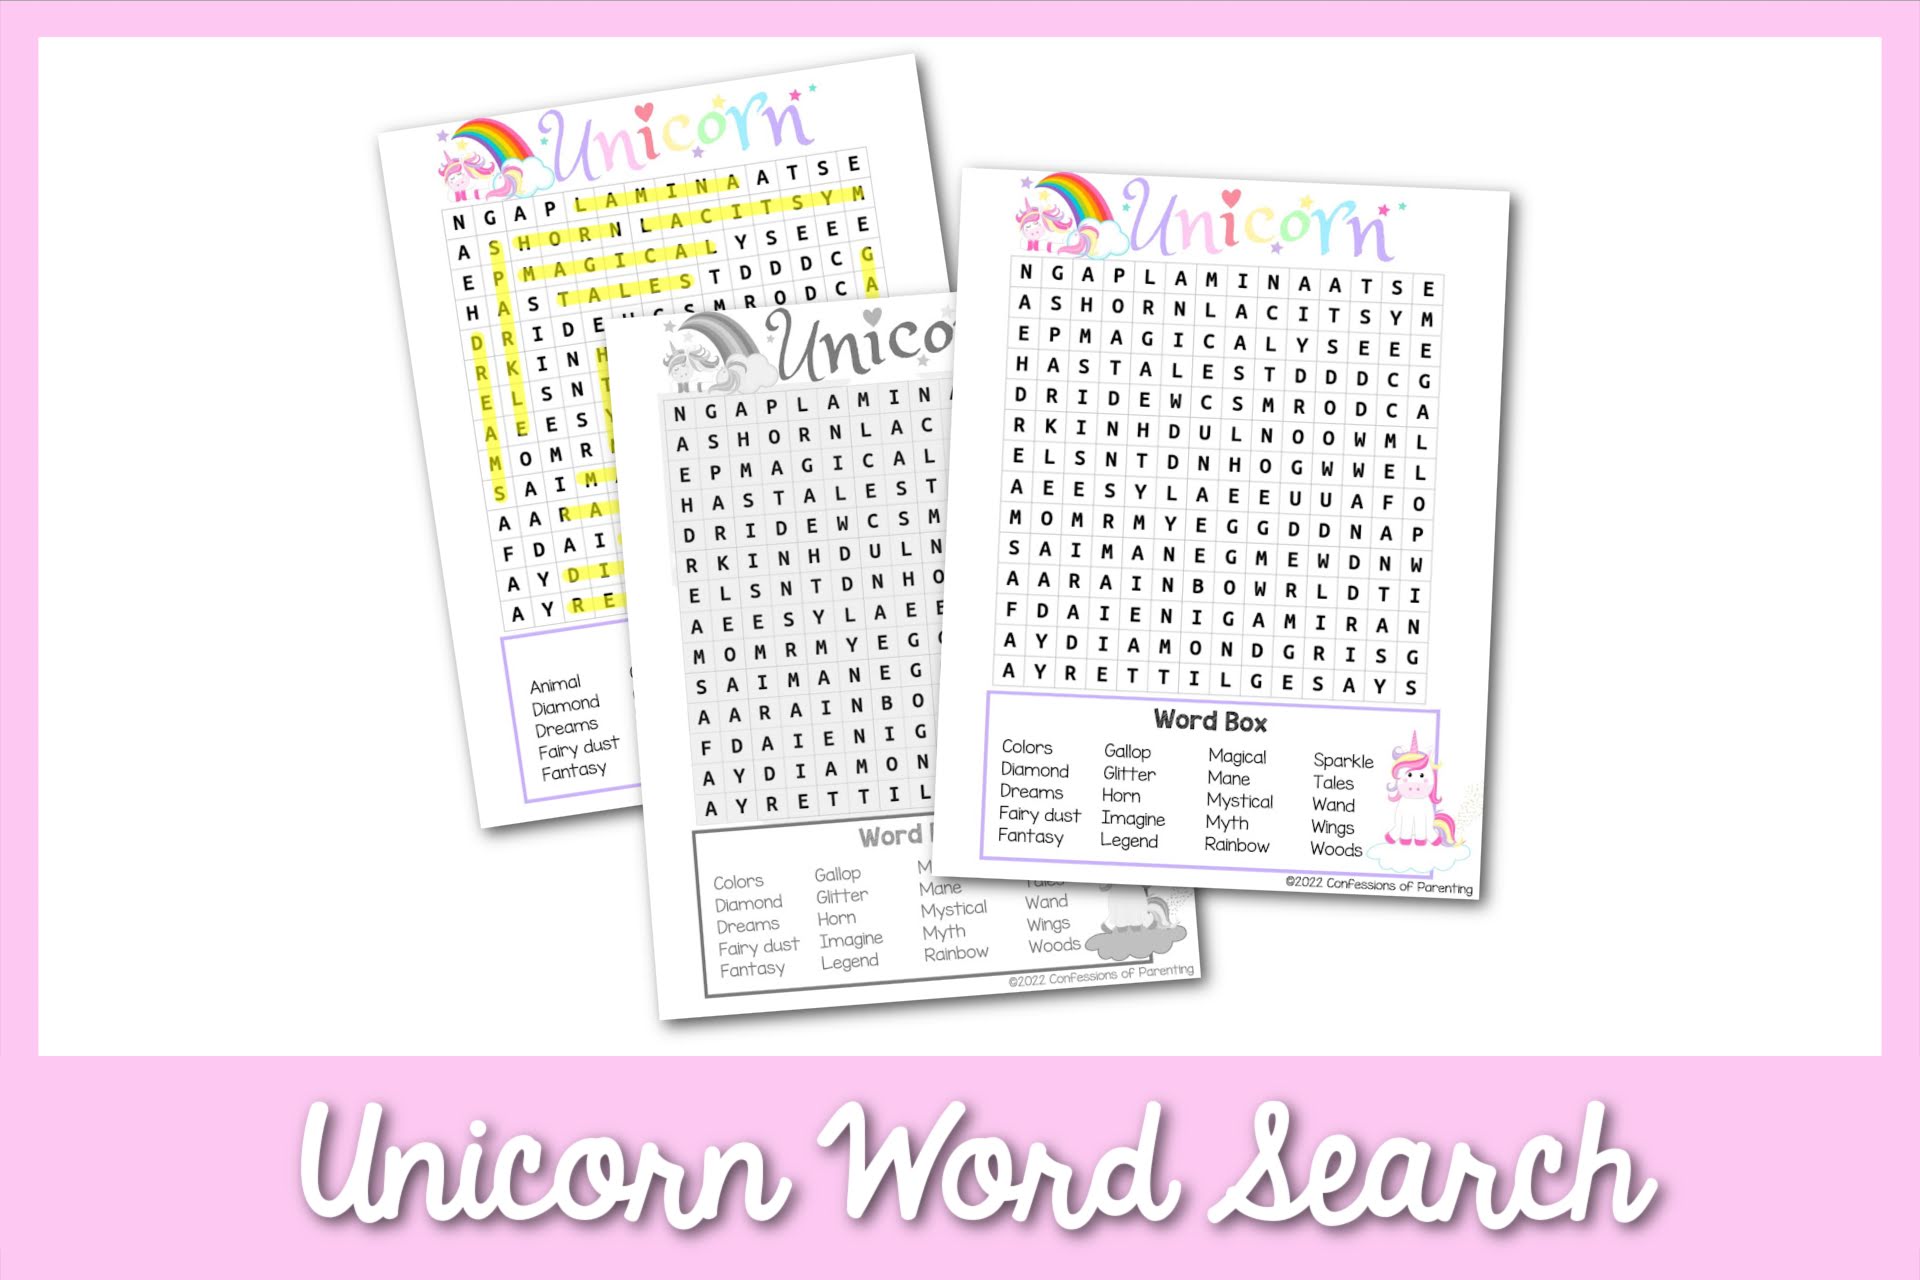 featured image: unicorn word search in a pink border